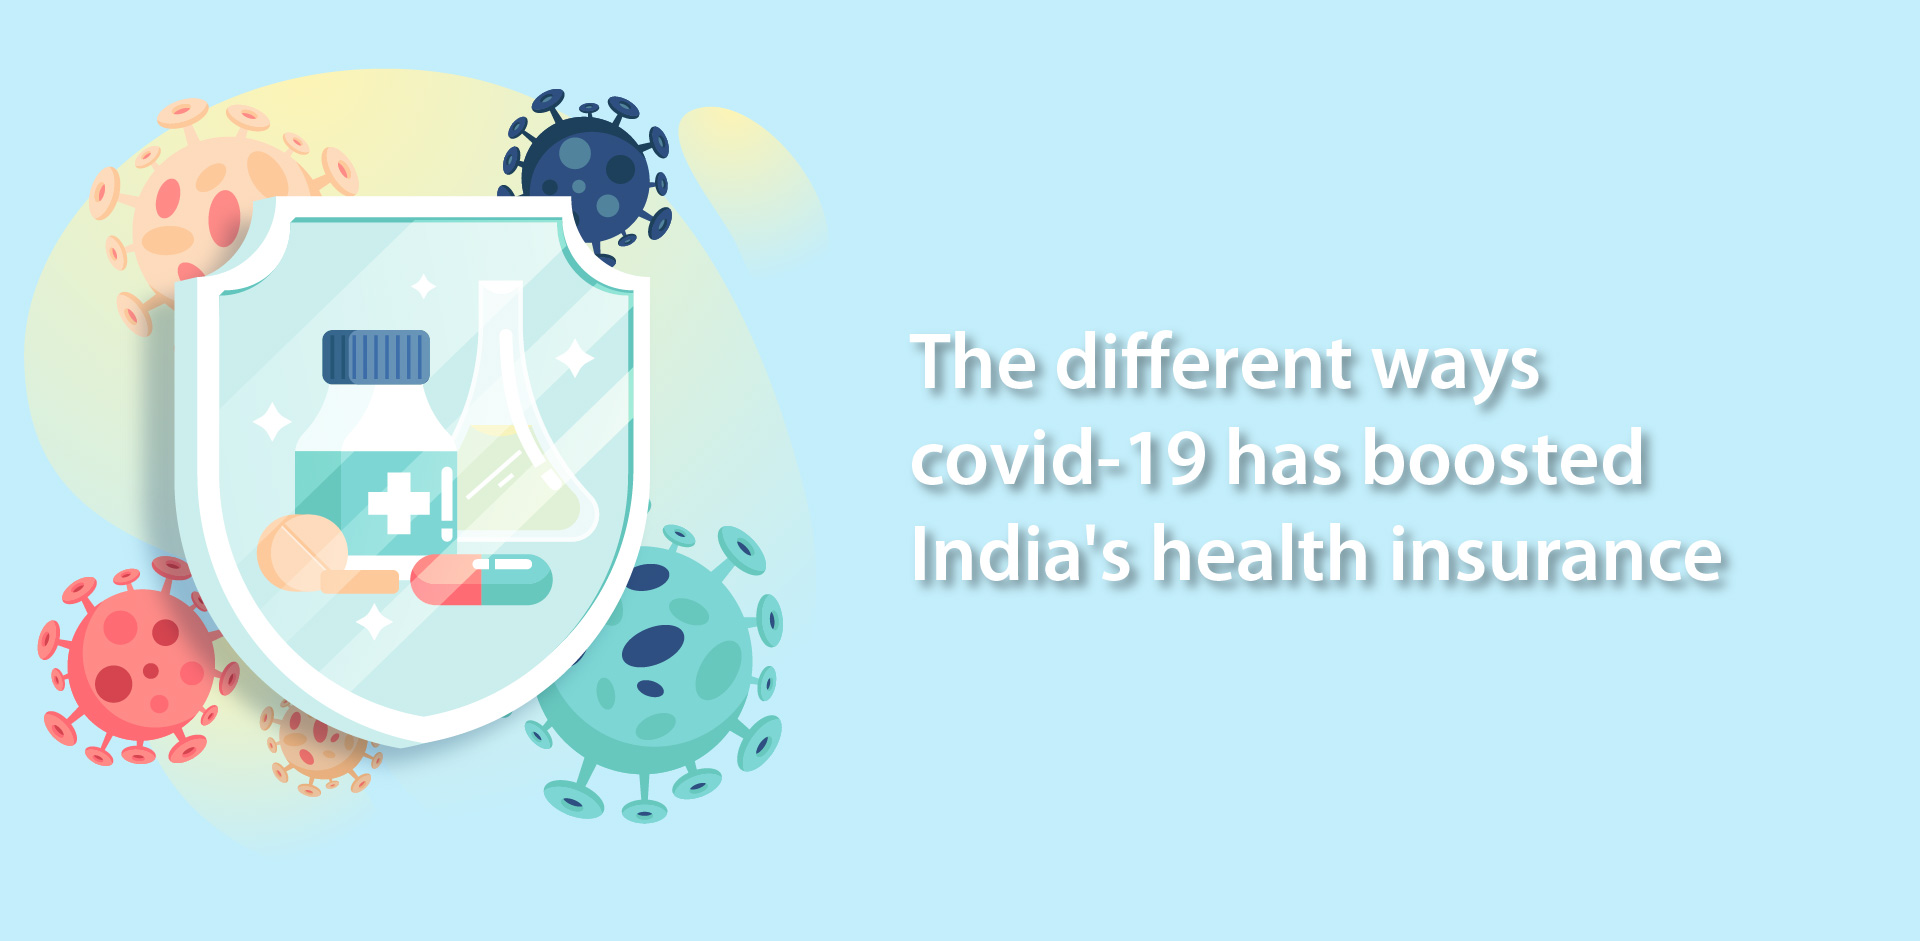 The different ways covid-19 has boosted India’s health insurance